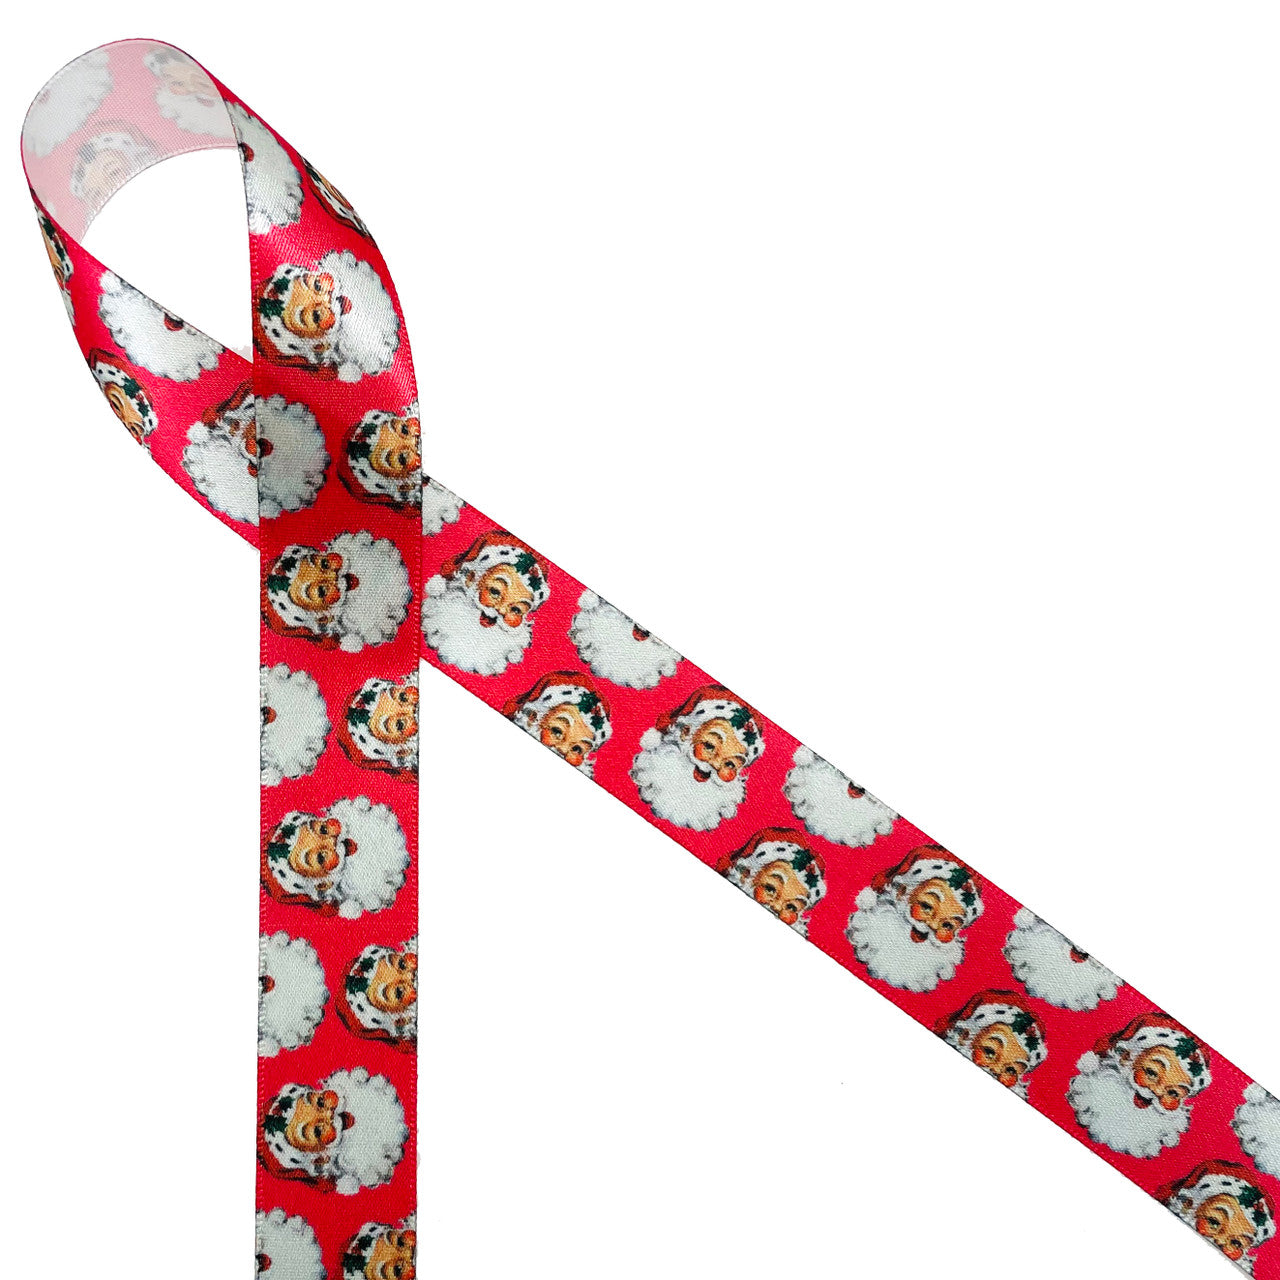 Our vintage Santa with his rosy cheeks, big smile and fluffy beard will take you back to an old fashioned Christmas. Make your gifts extra special with this fun ribbon! Designed and printed in the USA